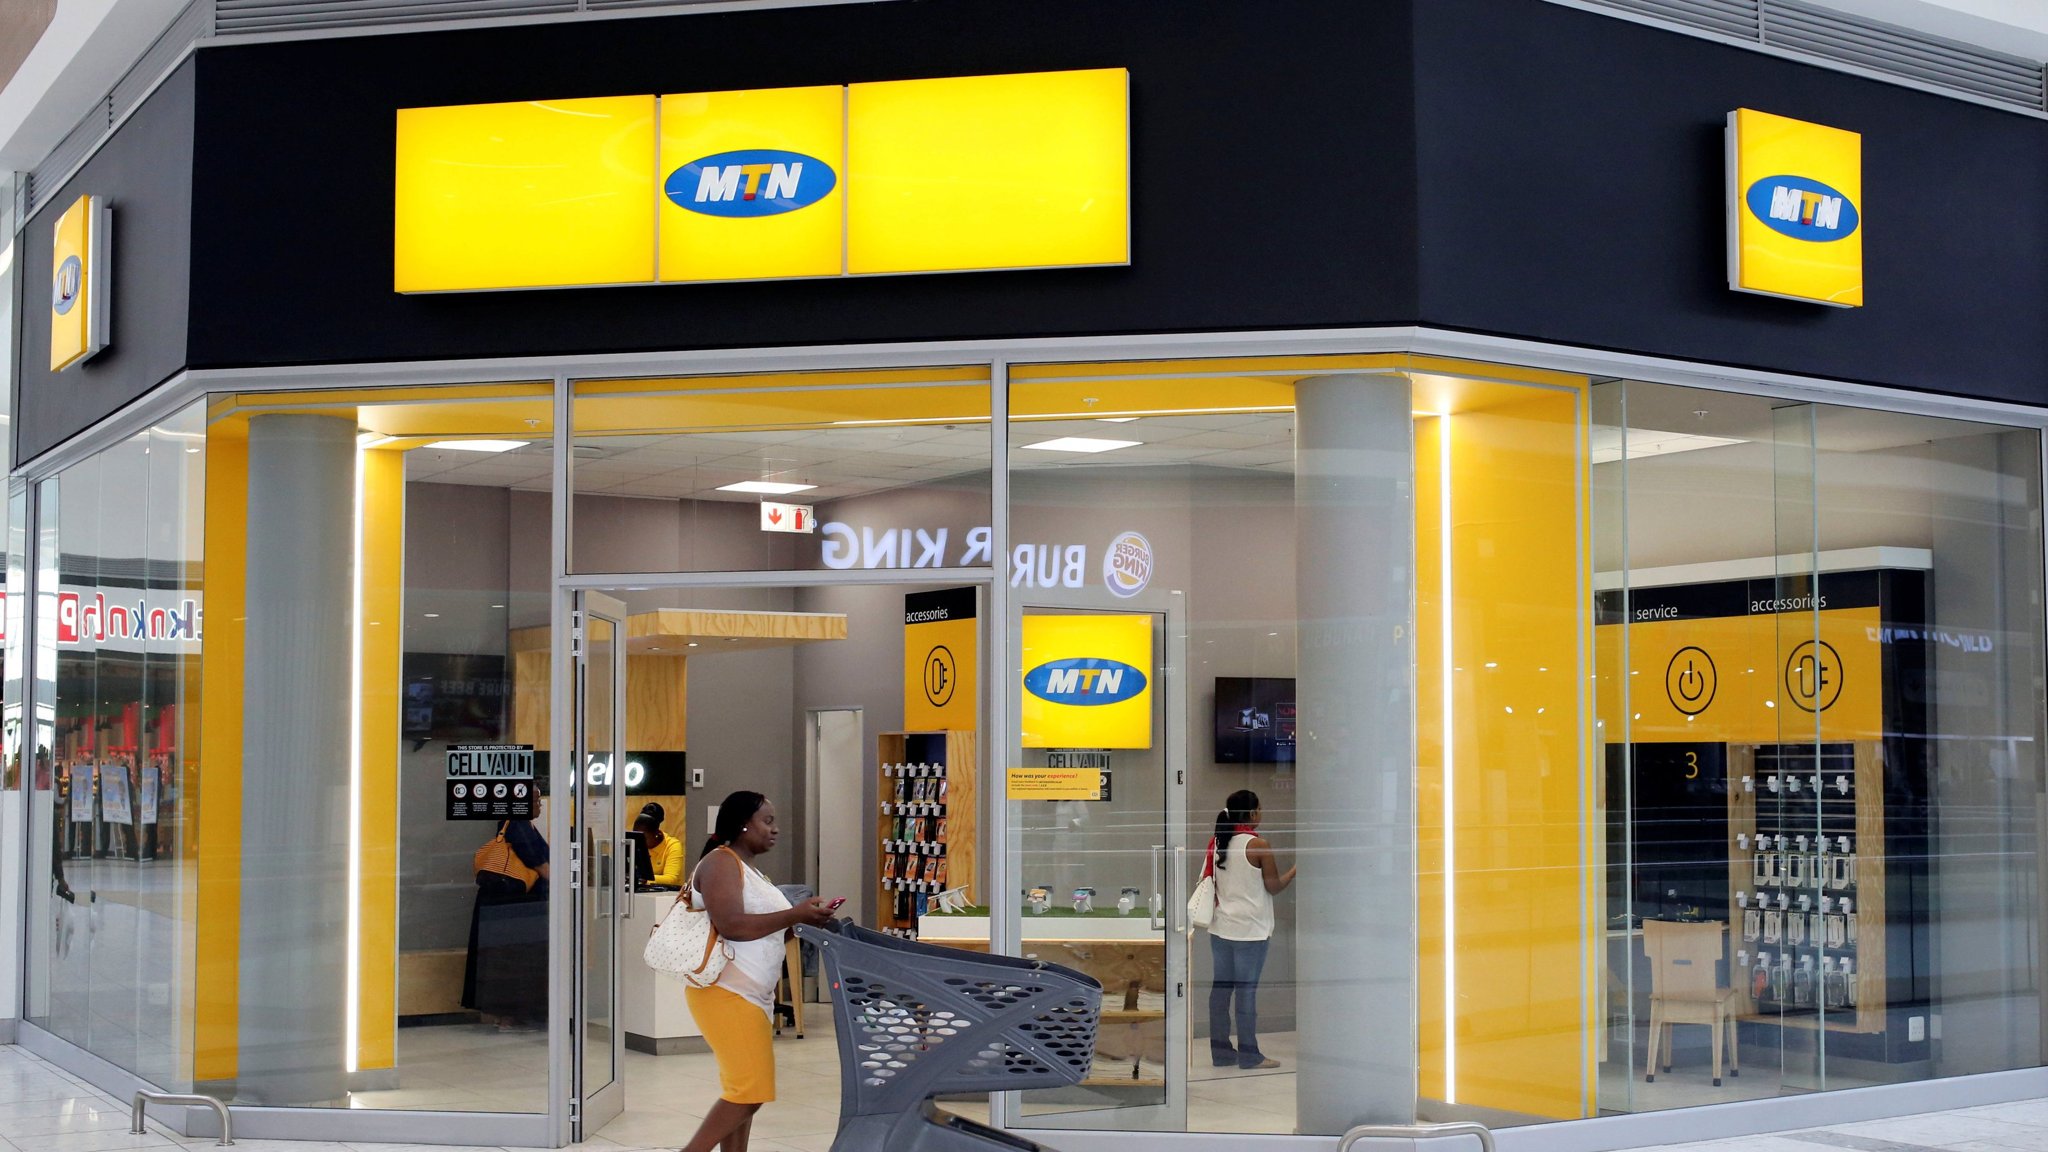 MTN Ghana to phase out airtime scratch cards by June 30